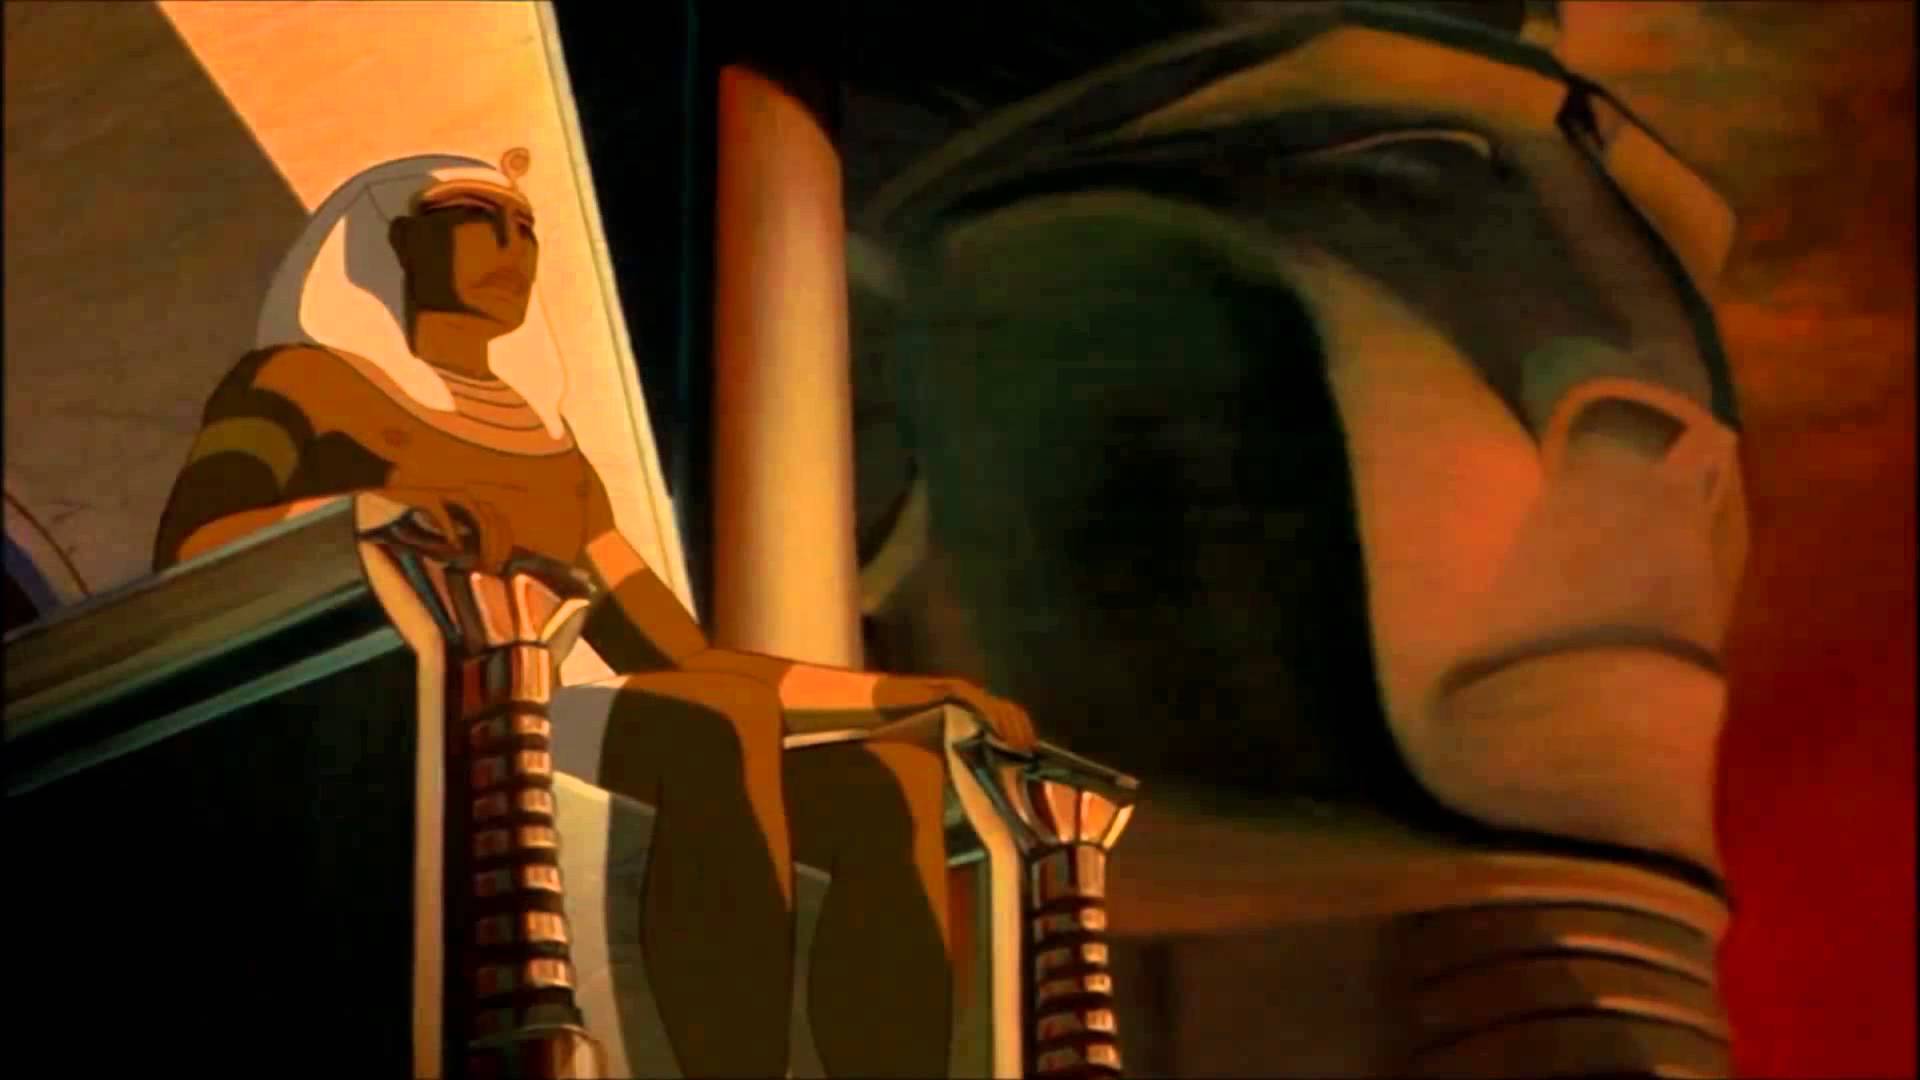 prince of egypt free download